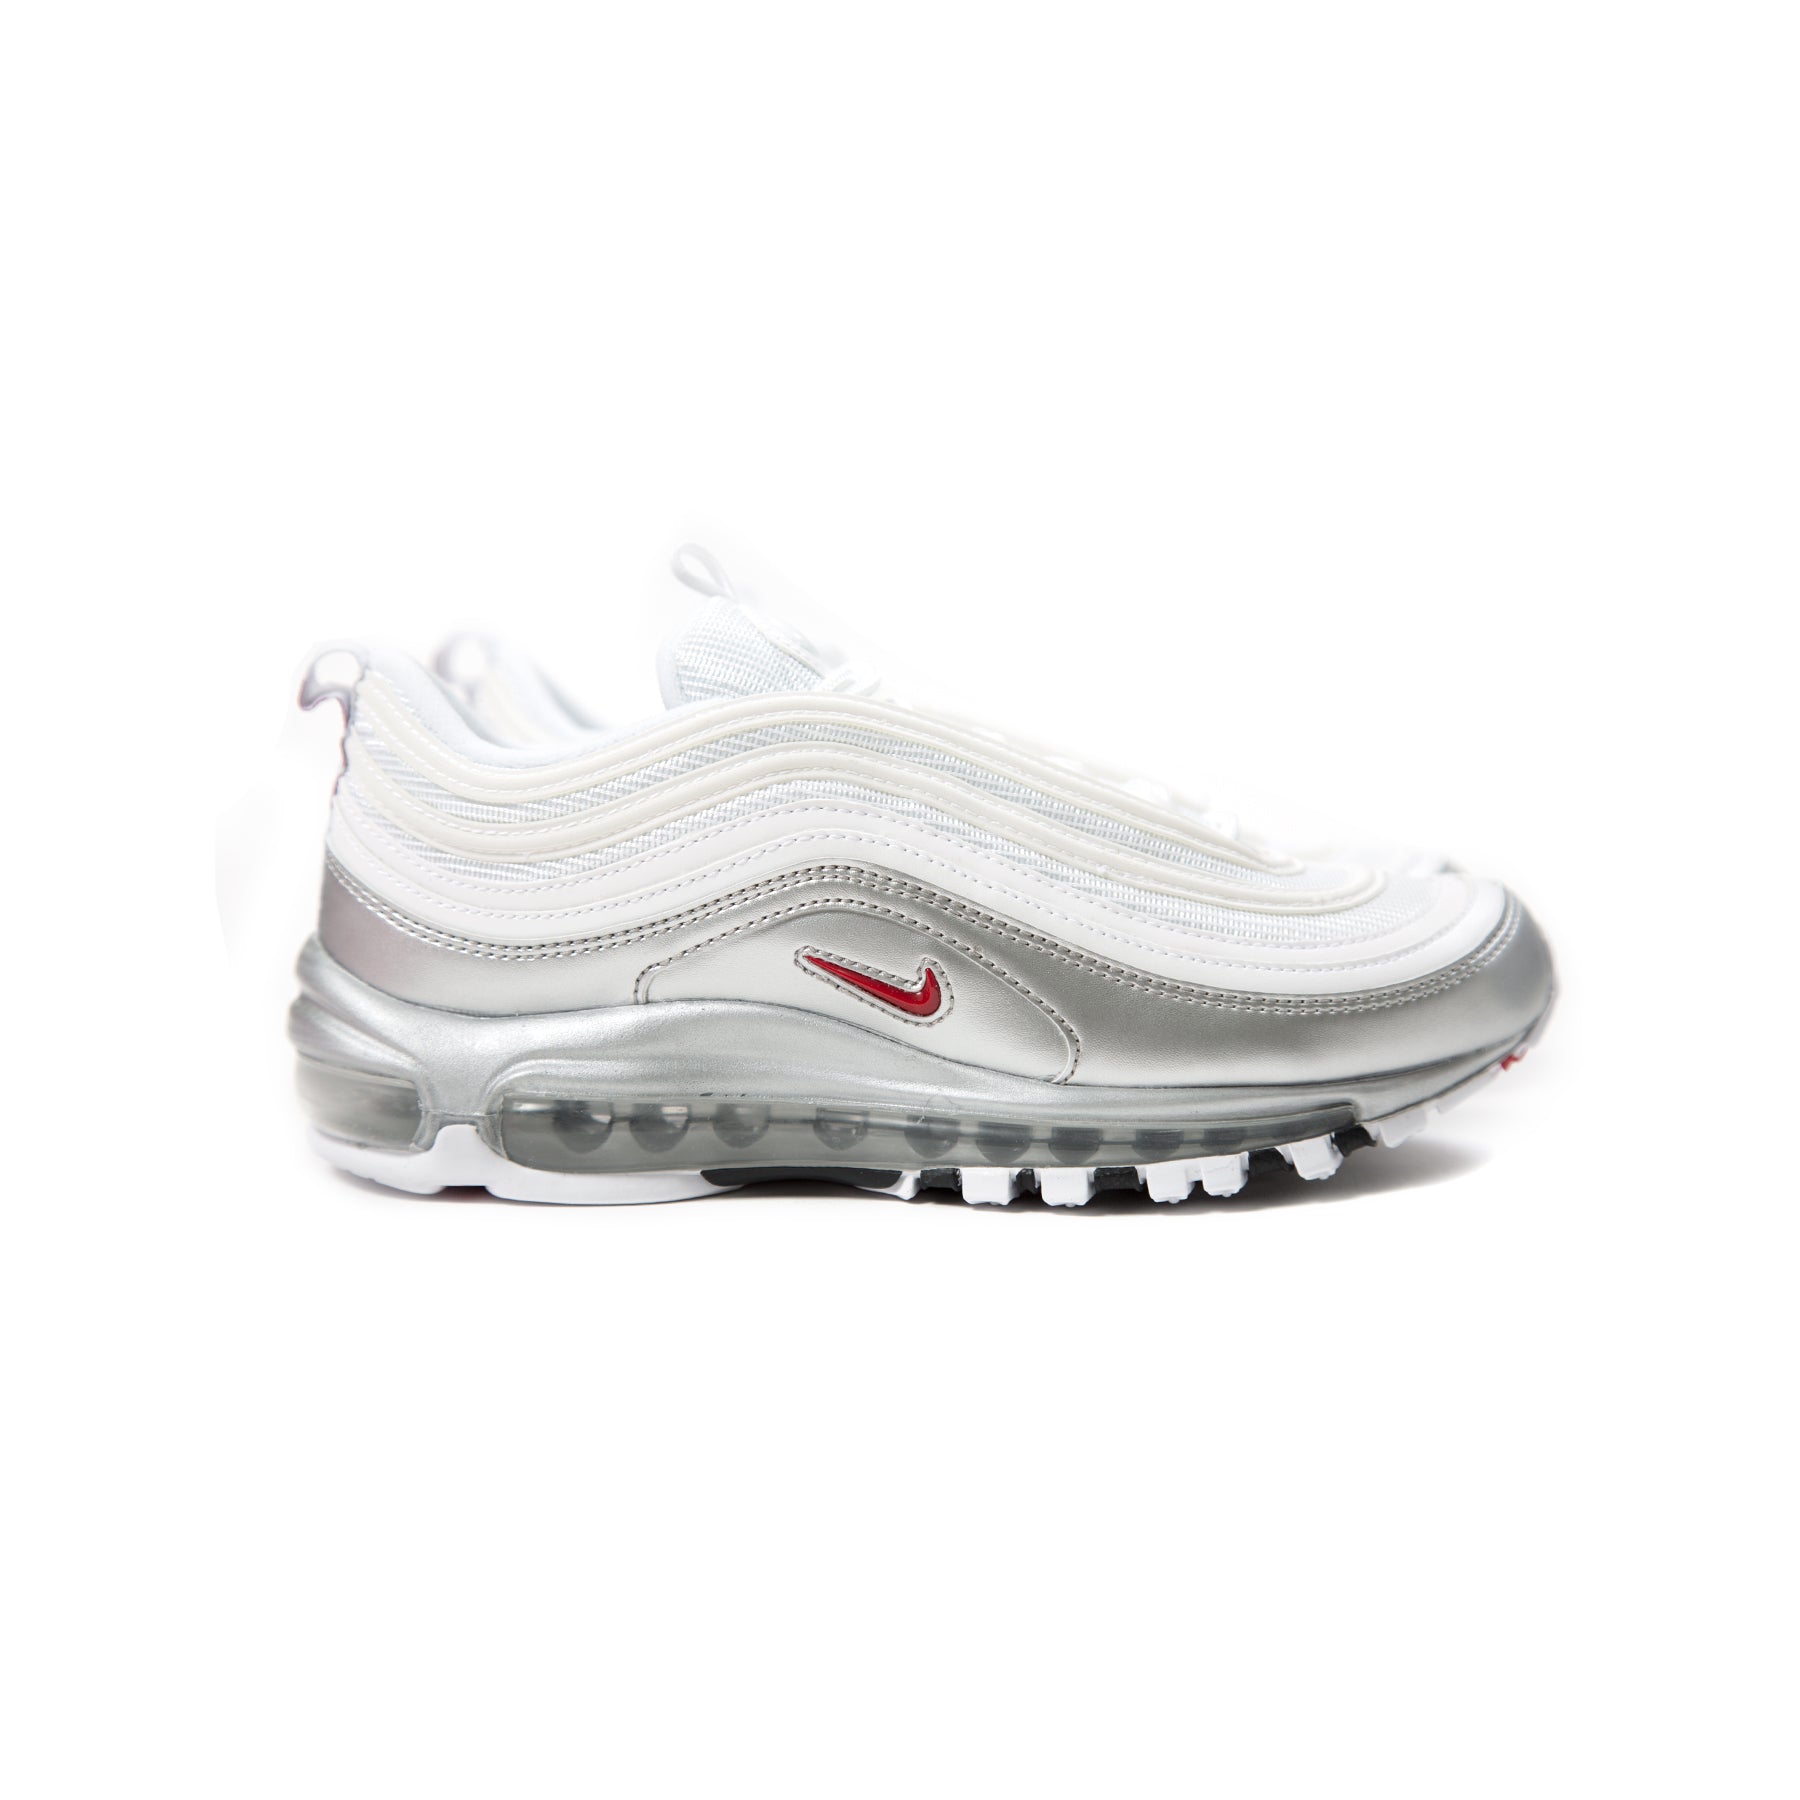 JD Sports Runner game on Nike Air Max 97 OG are the